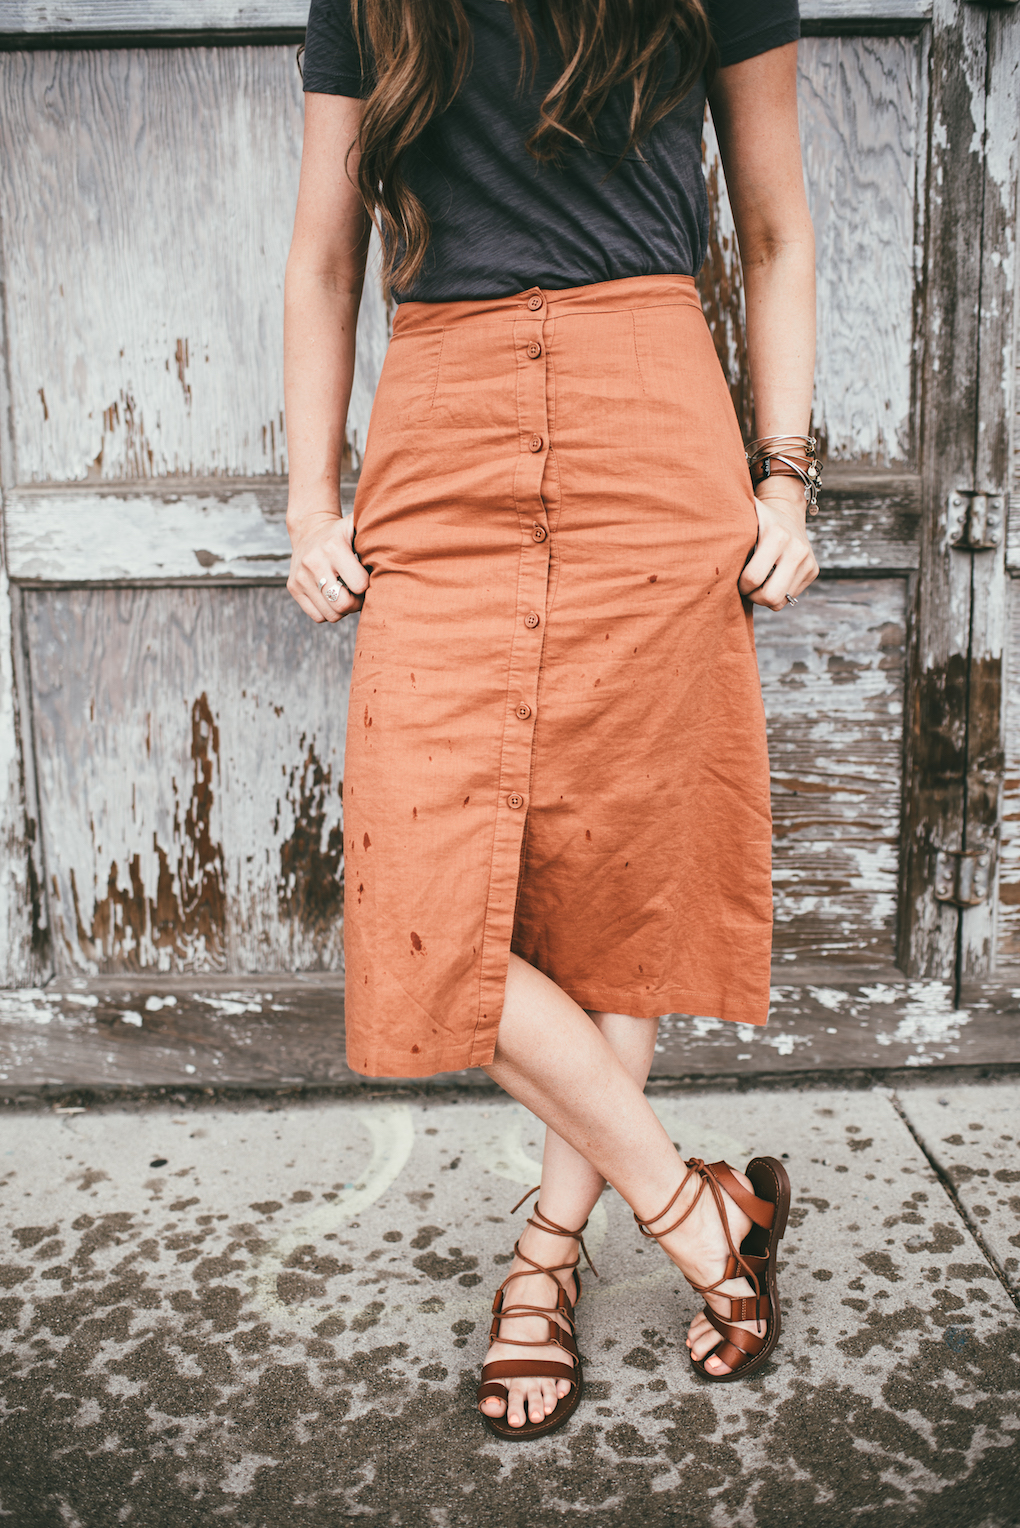 orange button up skirt paired with grey top and brown sandals